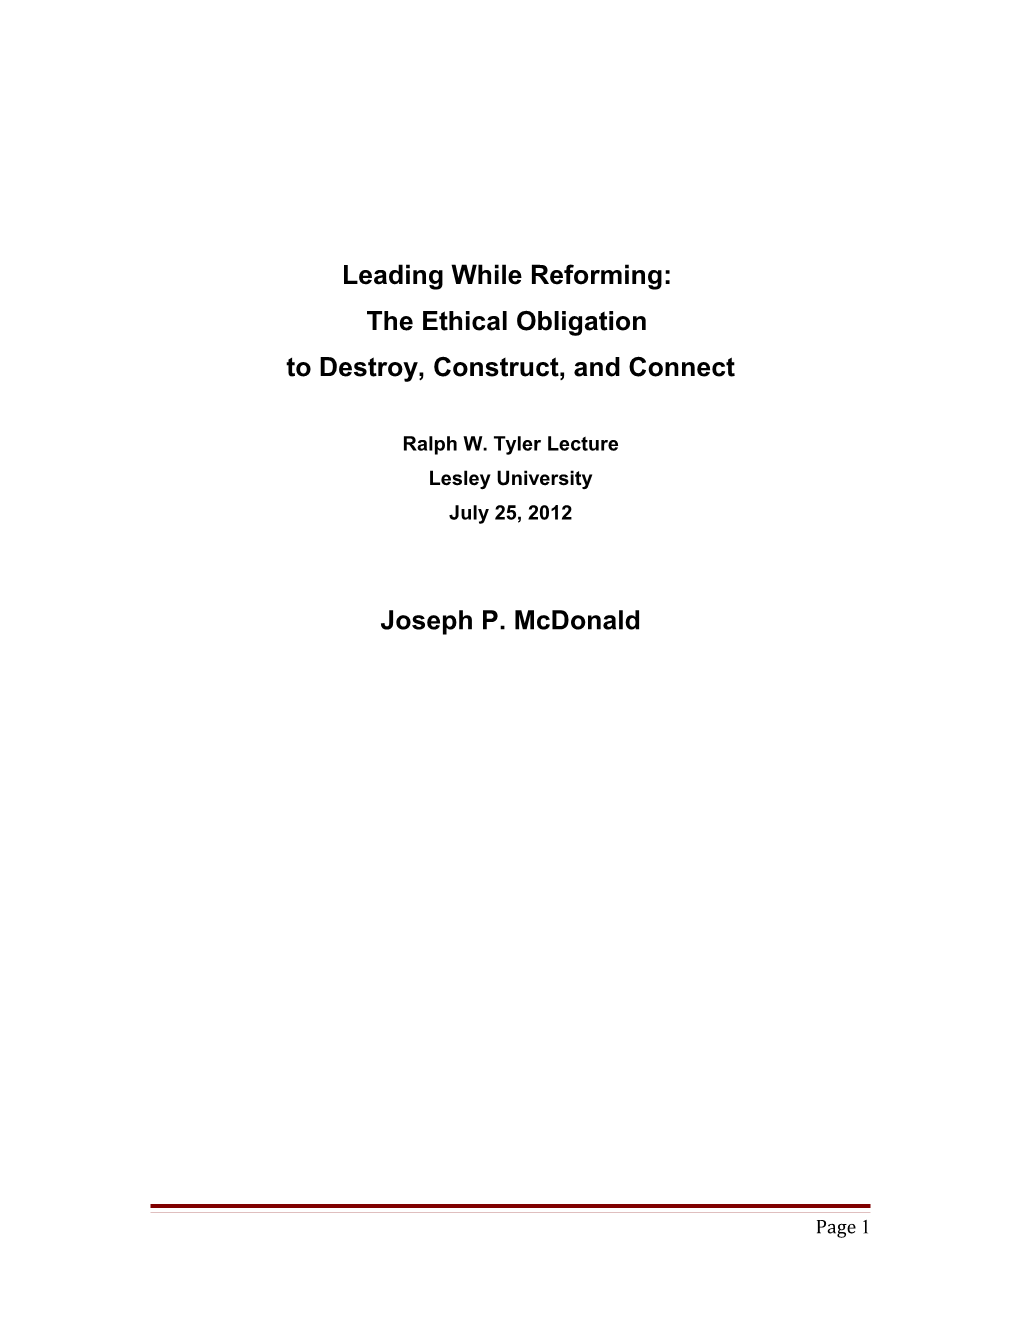 Leading While Reforming: the Ethical Obligation to Destroy, Construct, and Connect